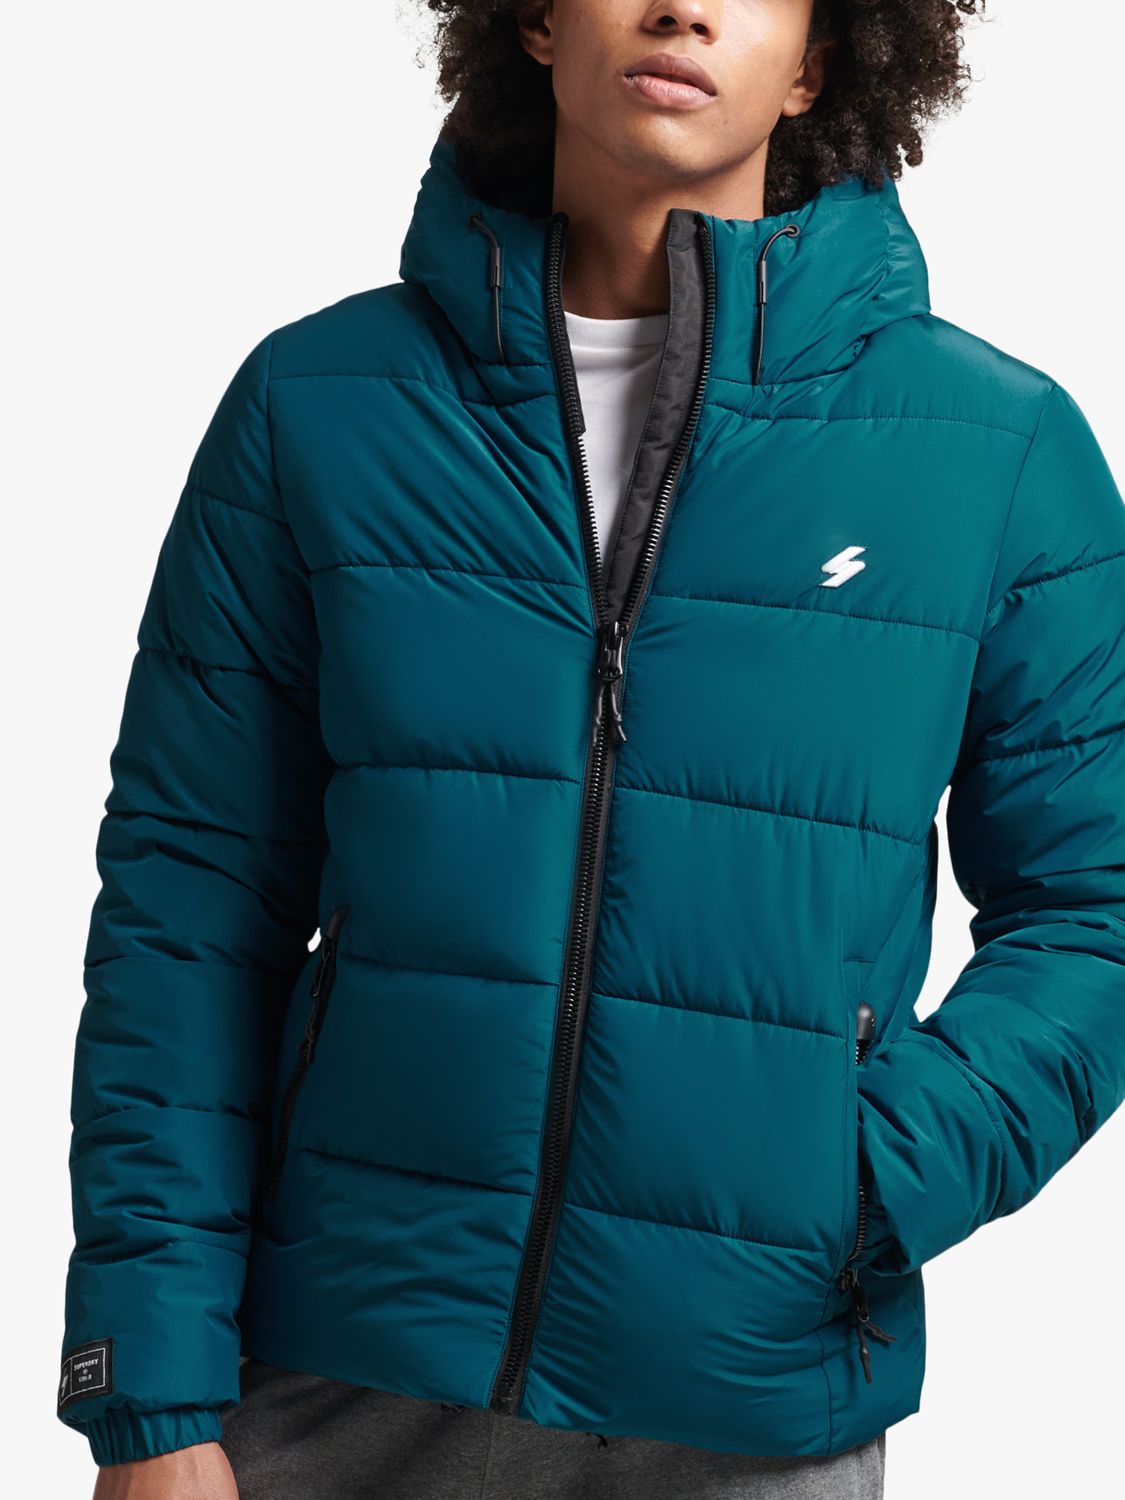 Superdry Hooded Sports Puffer Jacket, Lewis Partners & at Blue Sailor John